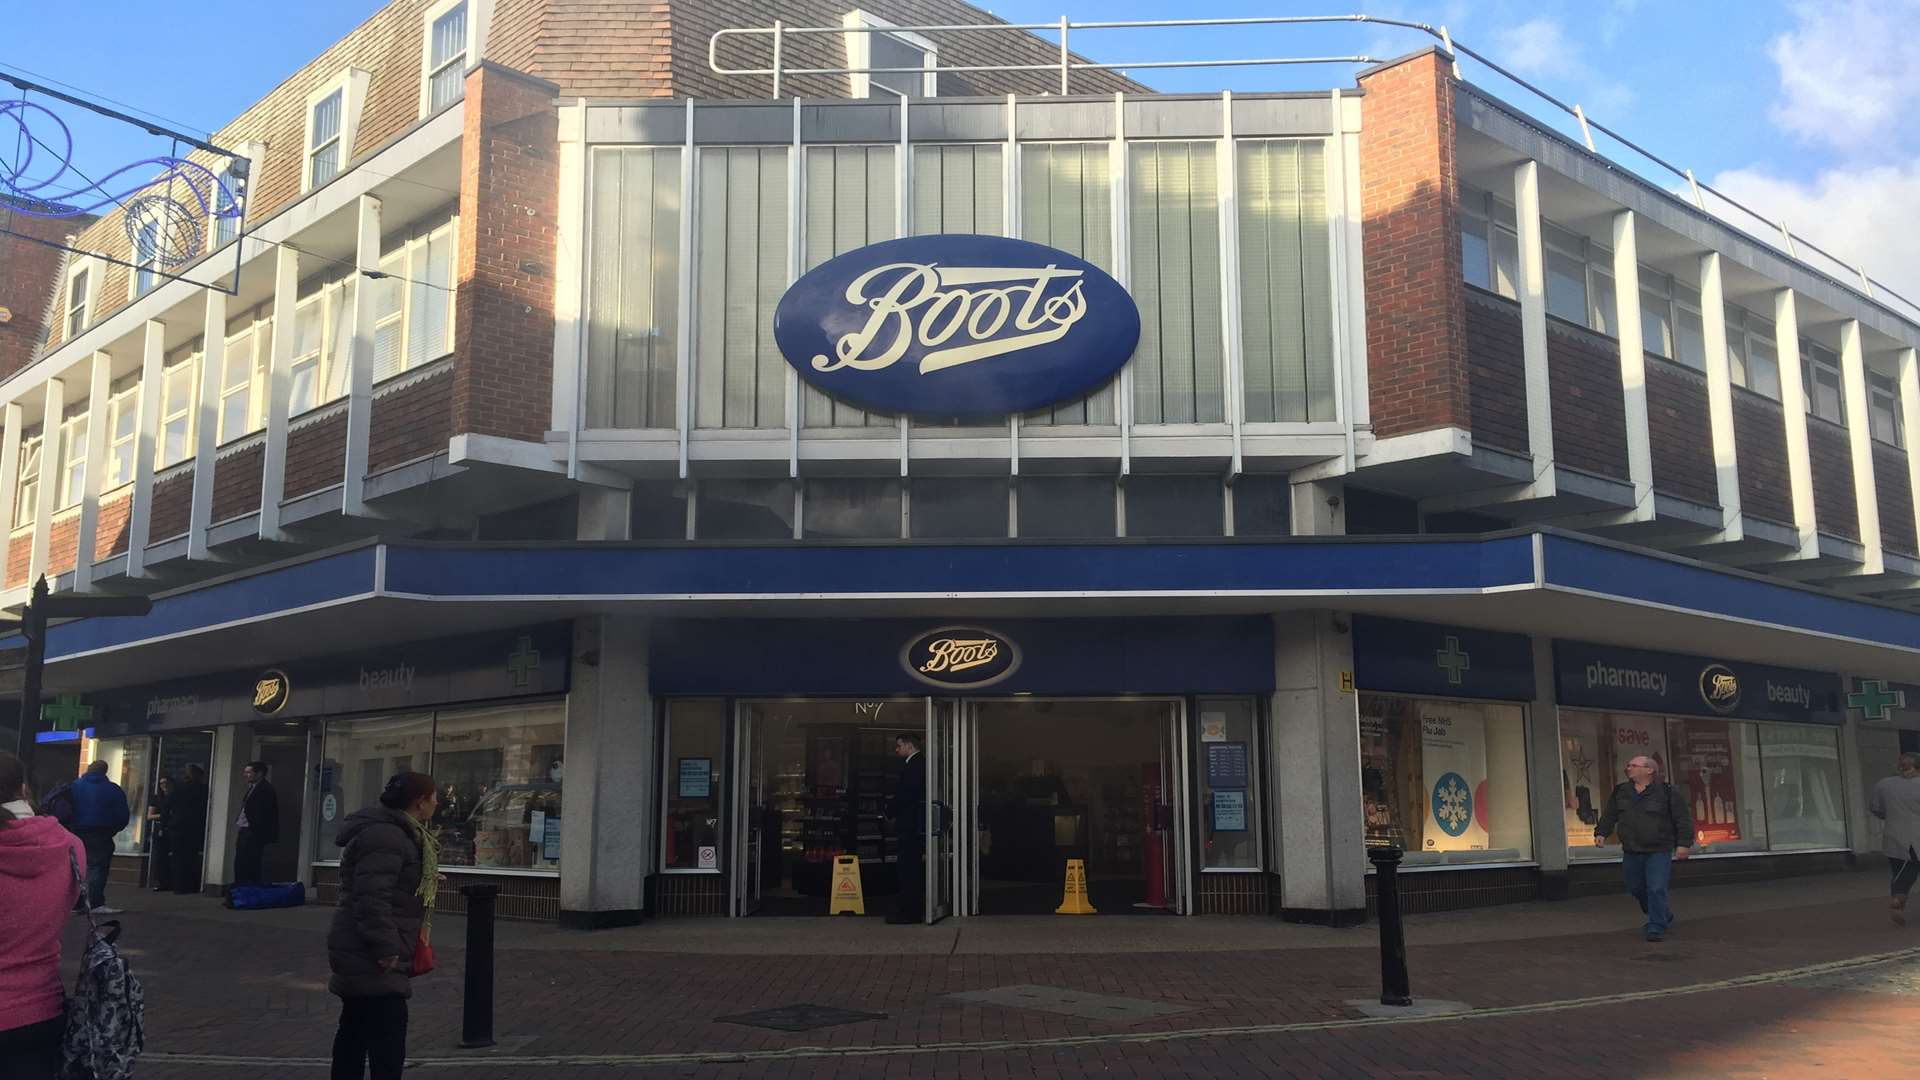 The Boots photo lab is set to shut in Ashford town centre